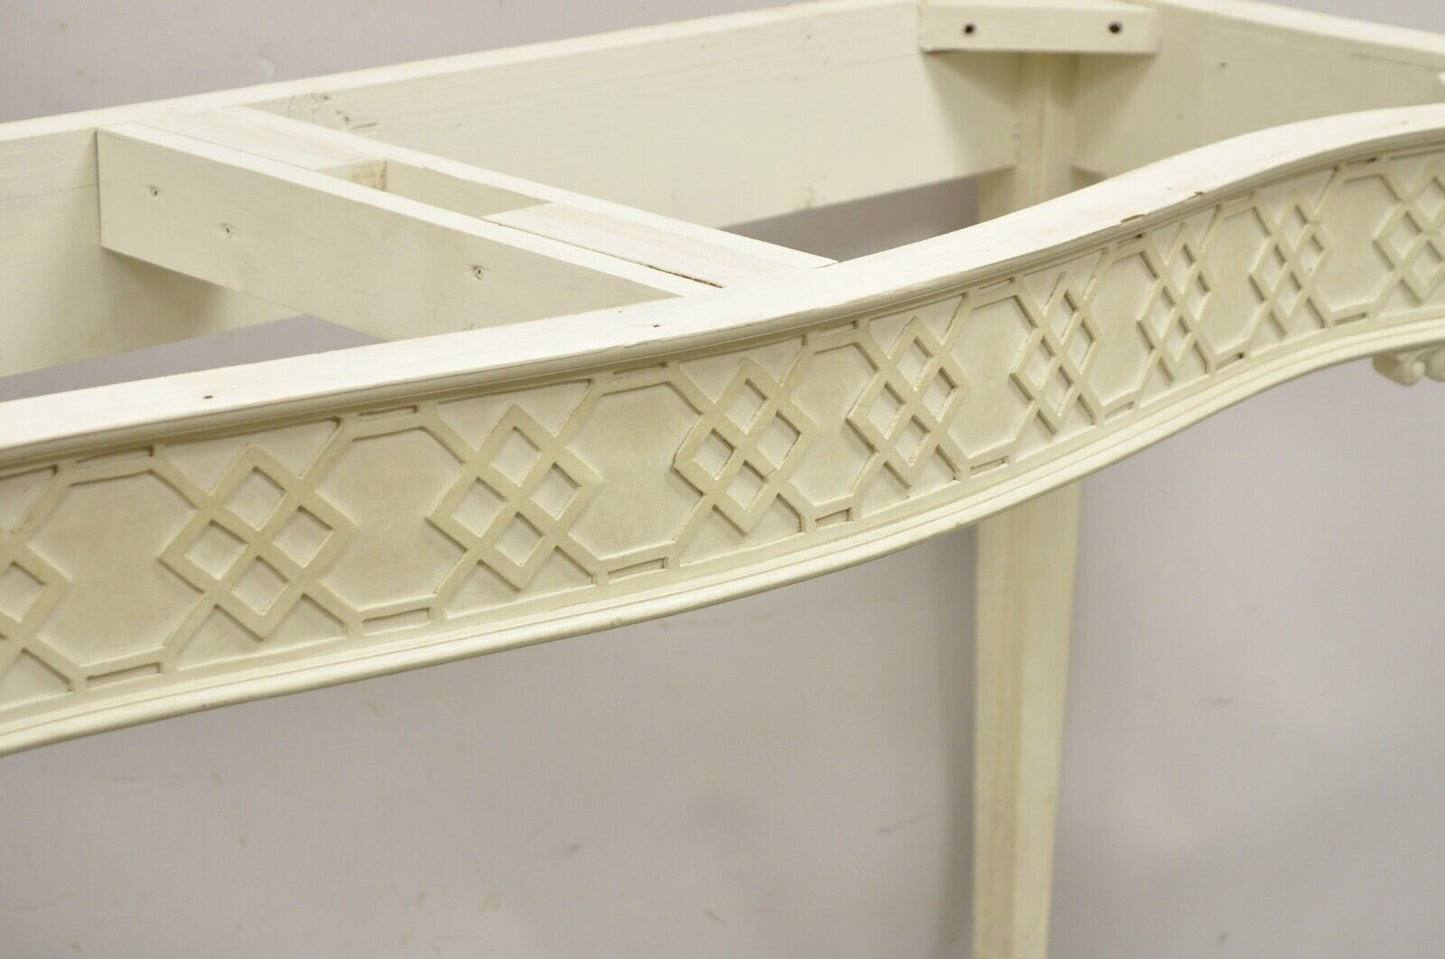 George III Chippendale Style Serpentine Fretwork White Console Hall Table Base